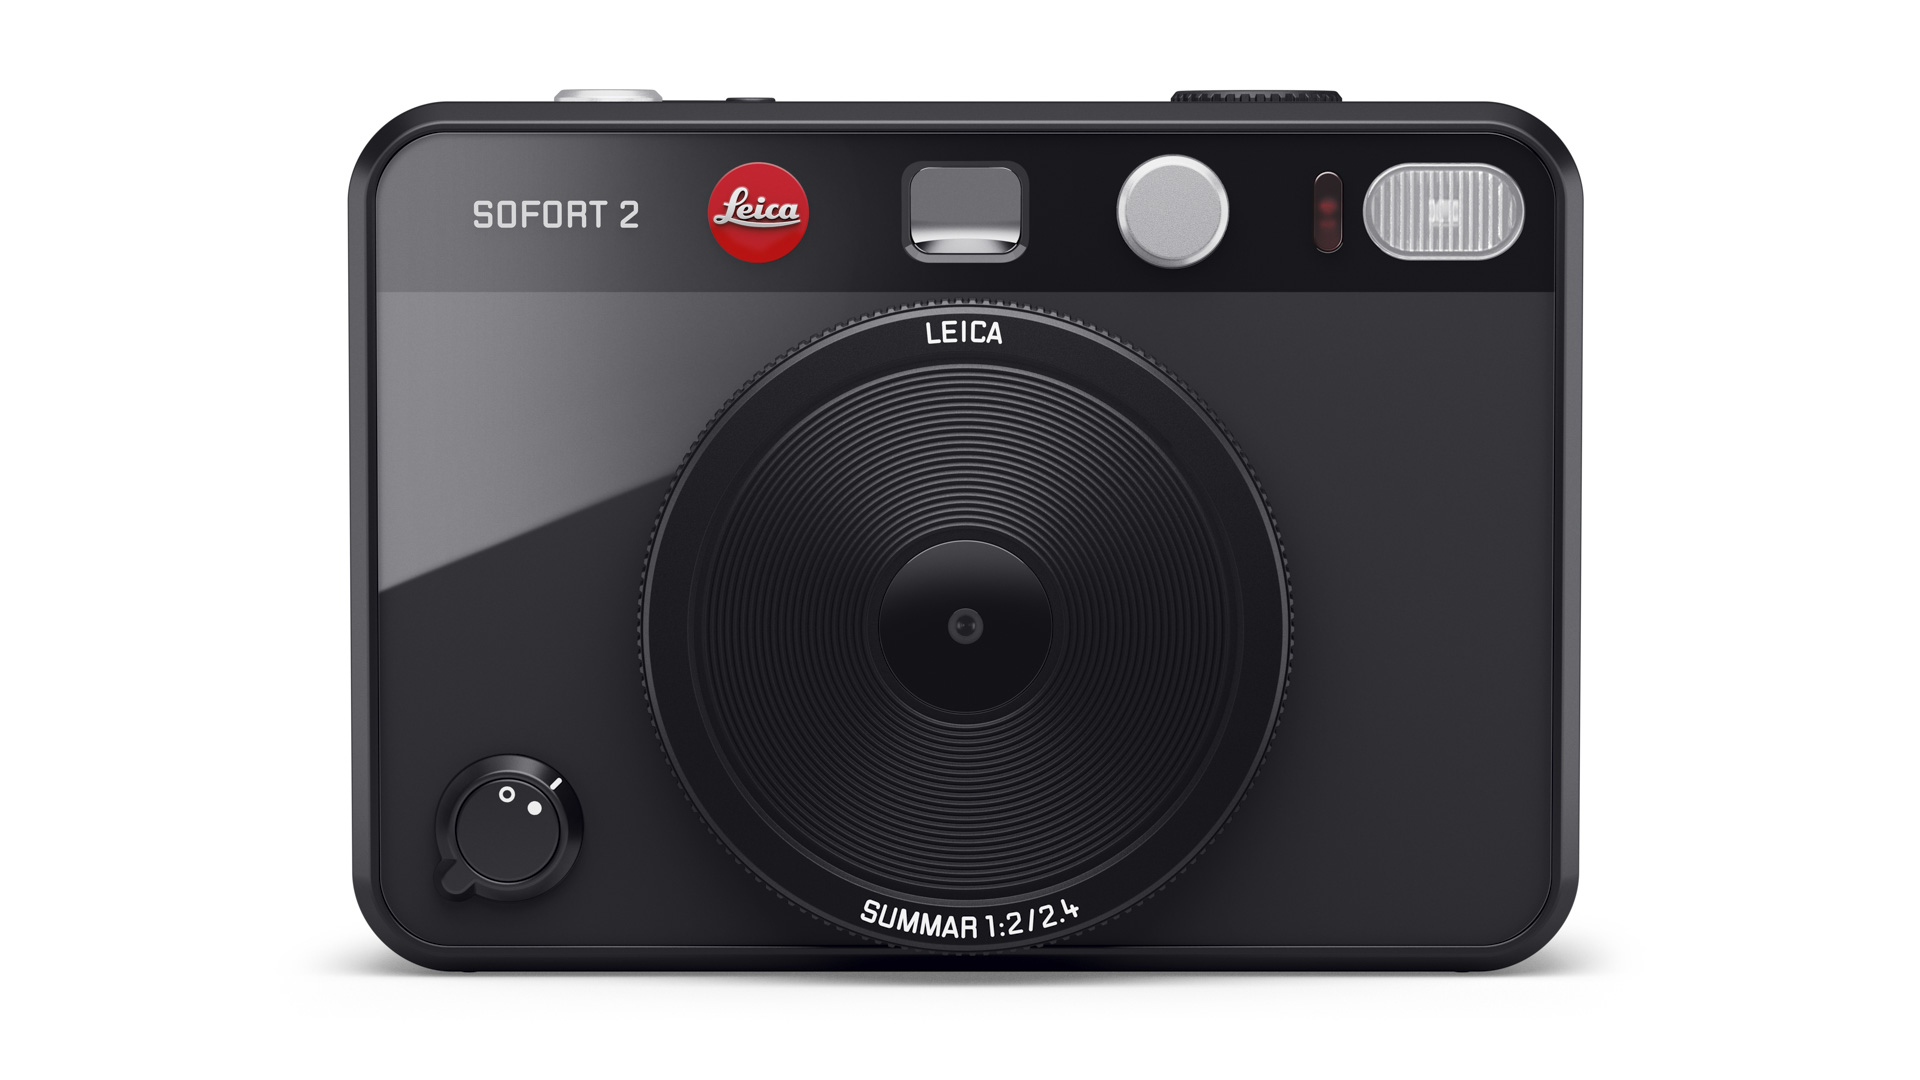 Leica Sofort 2 instant camera in black, on a white background